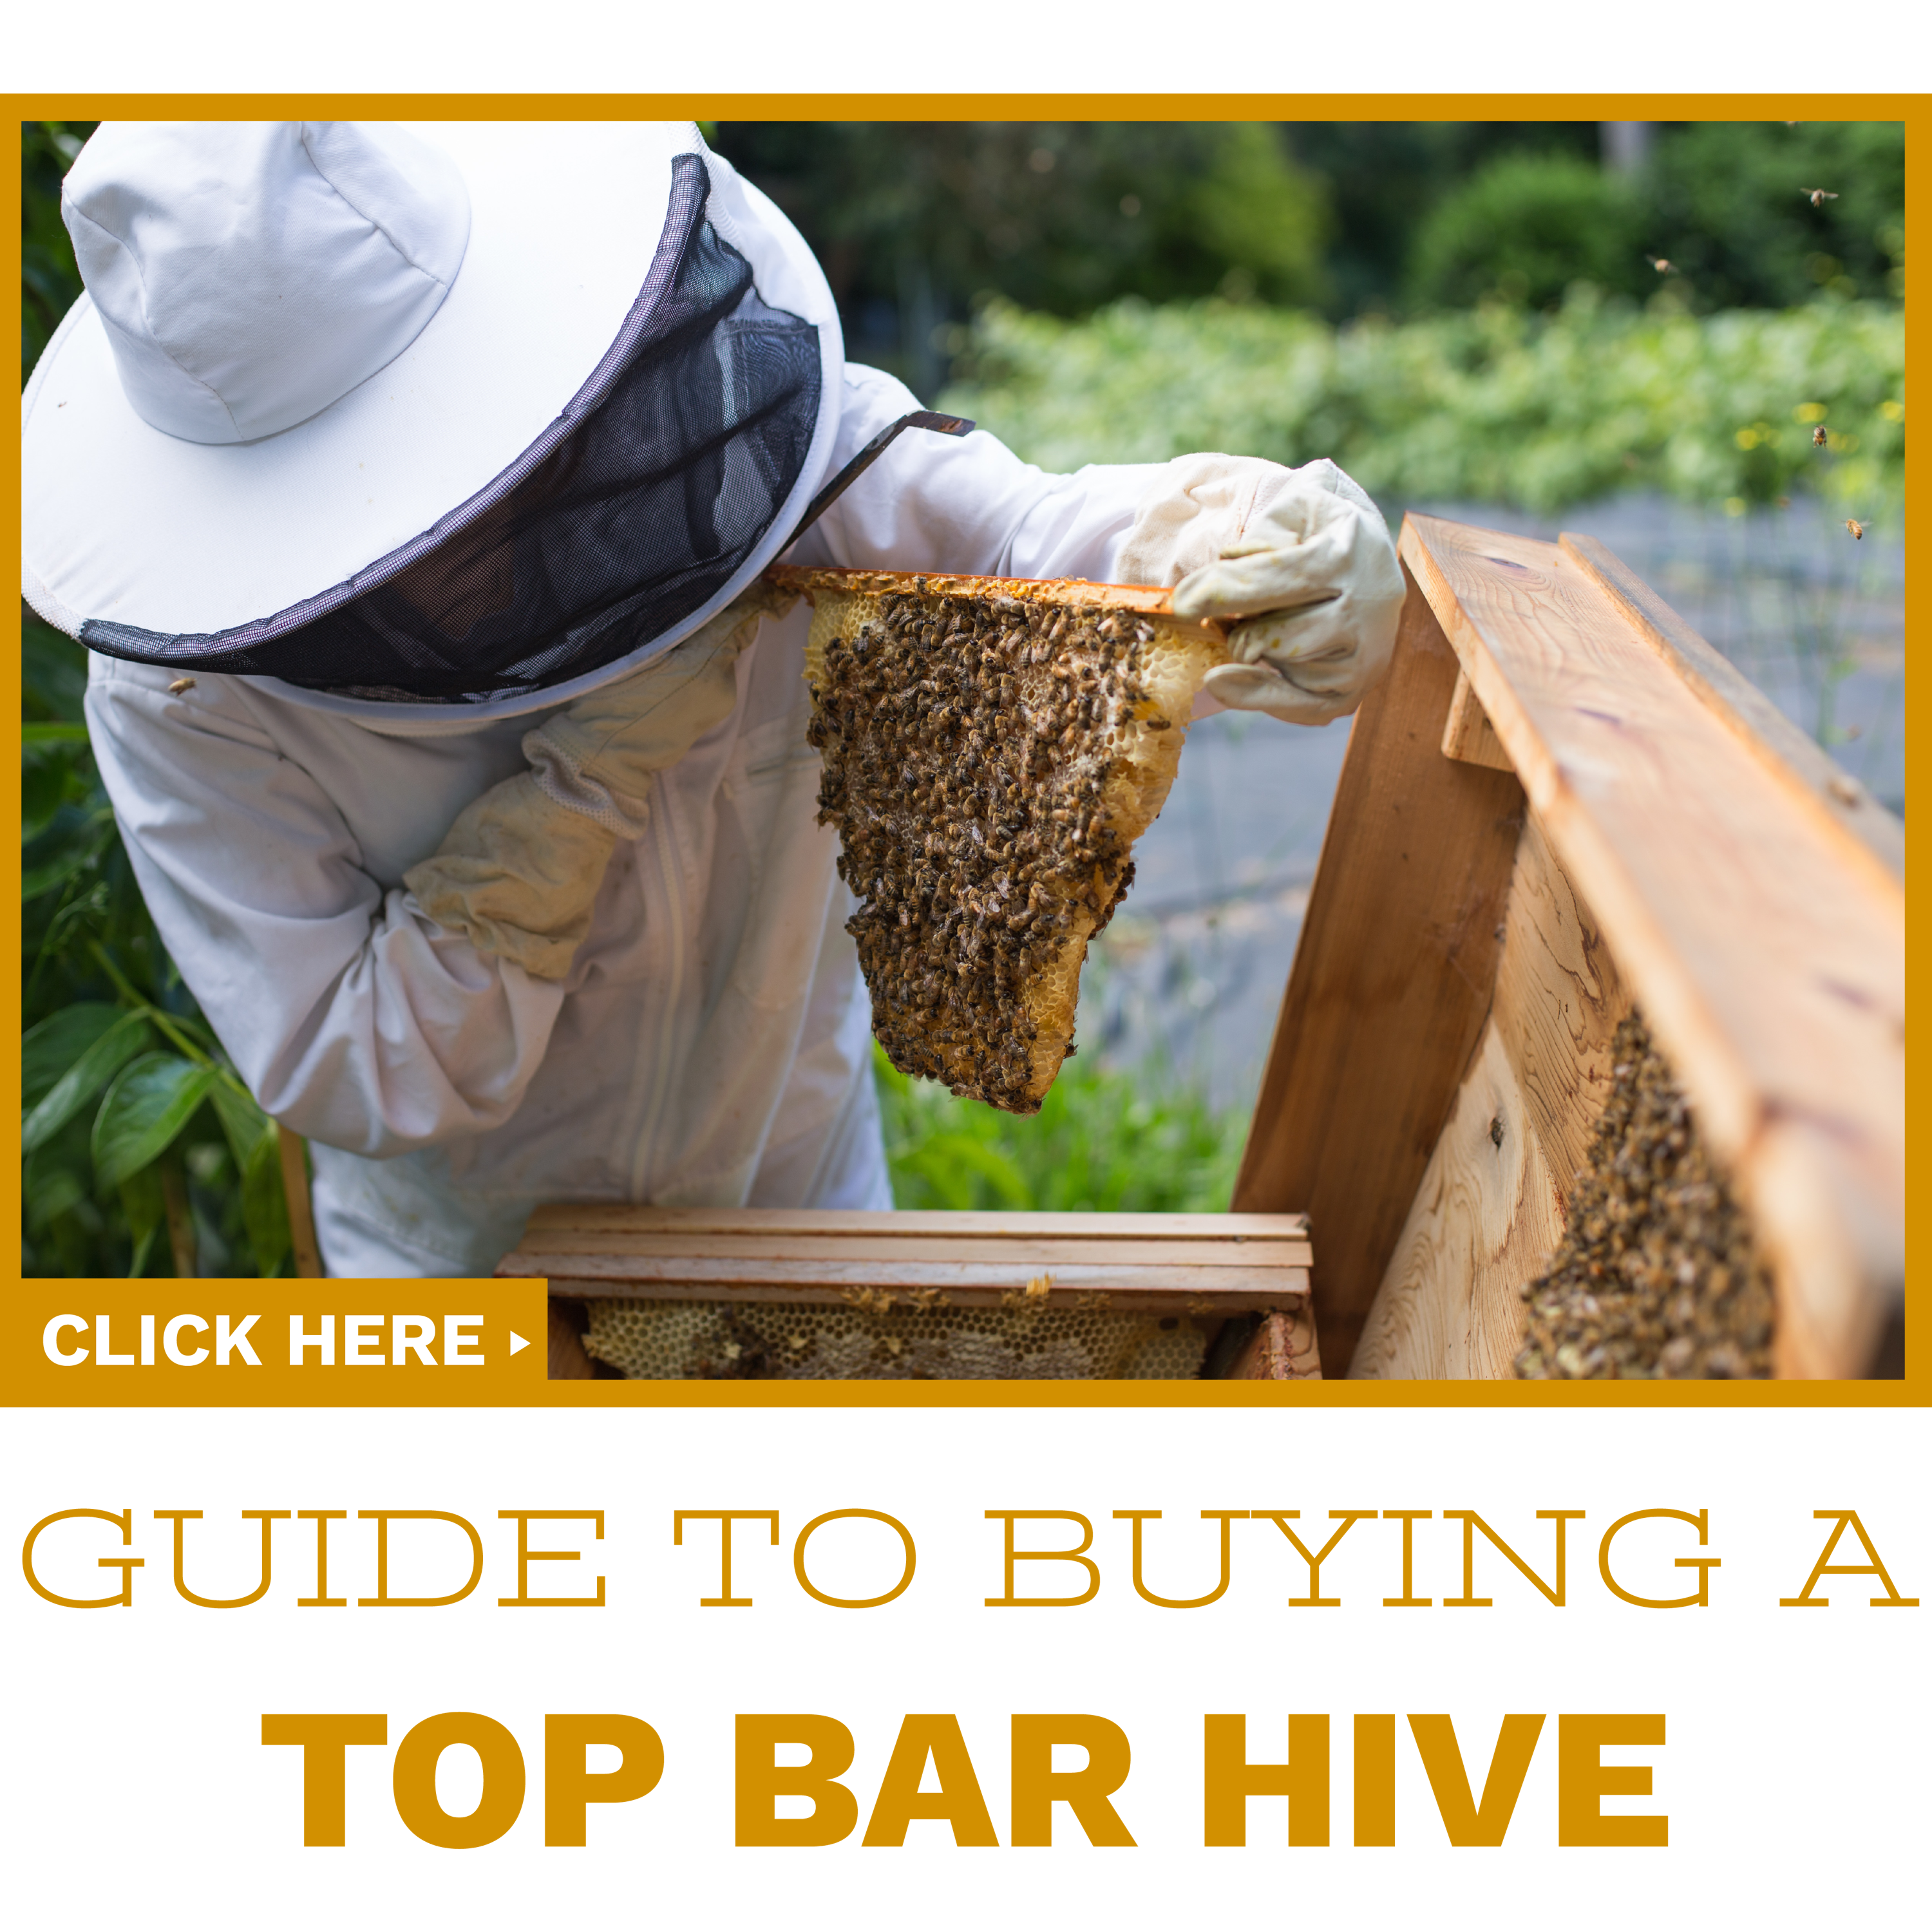 Click to read our guide on buying your first Top Bar Hive